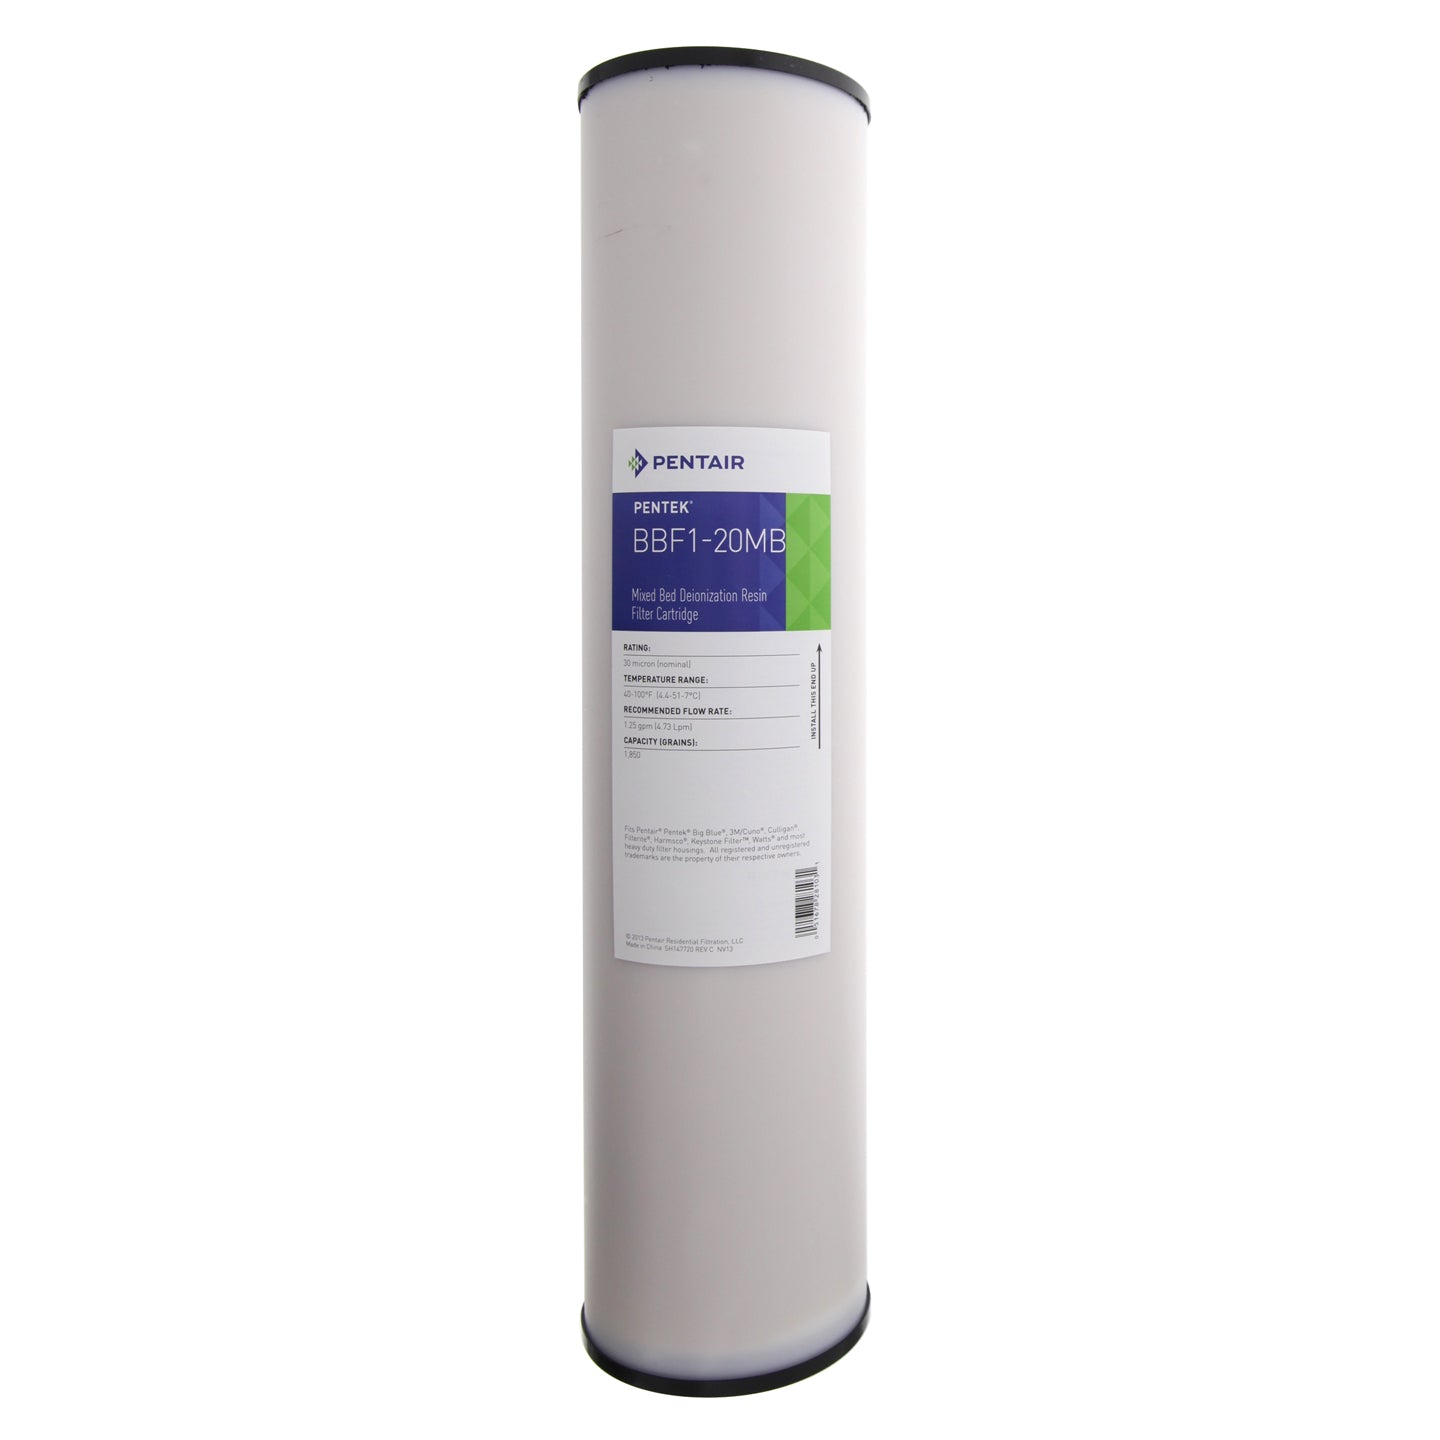 Pentek BBF1-20MB Mixed Bed Deionization Water Filter (20-inch x 4.5-inch)